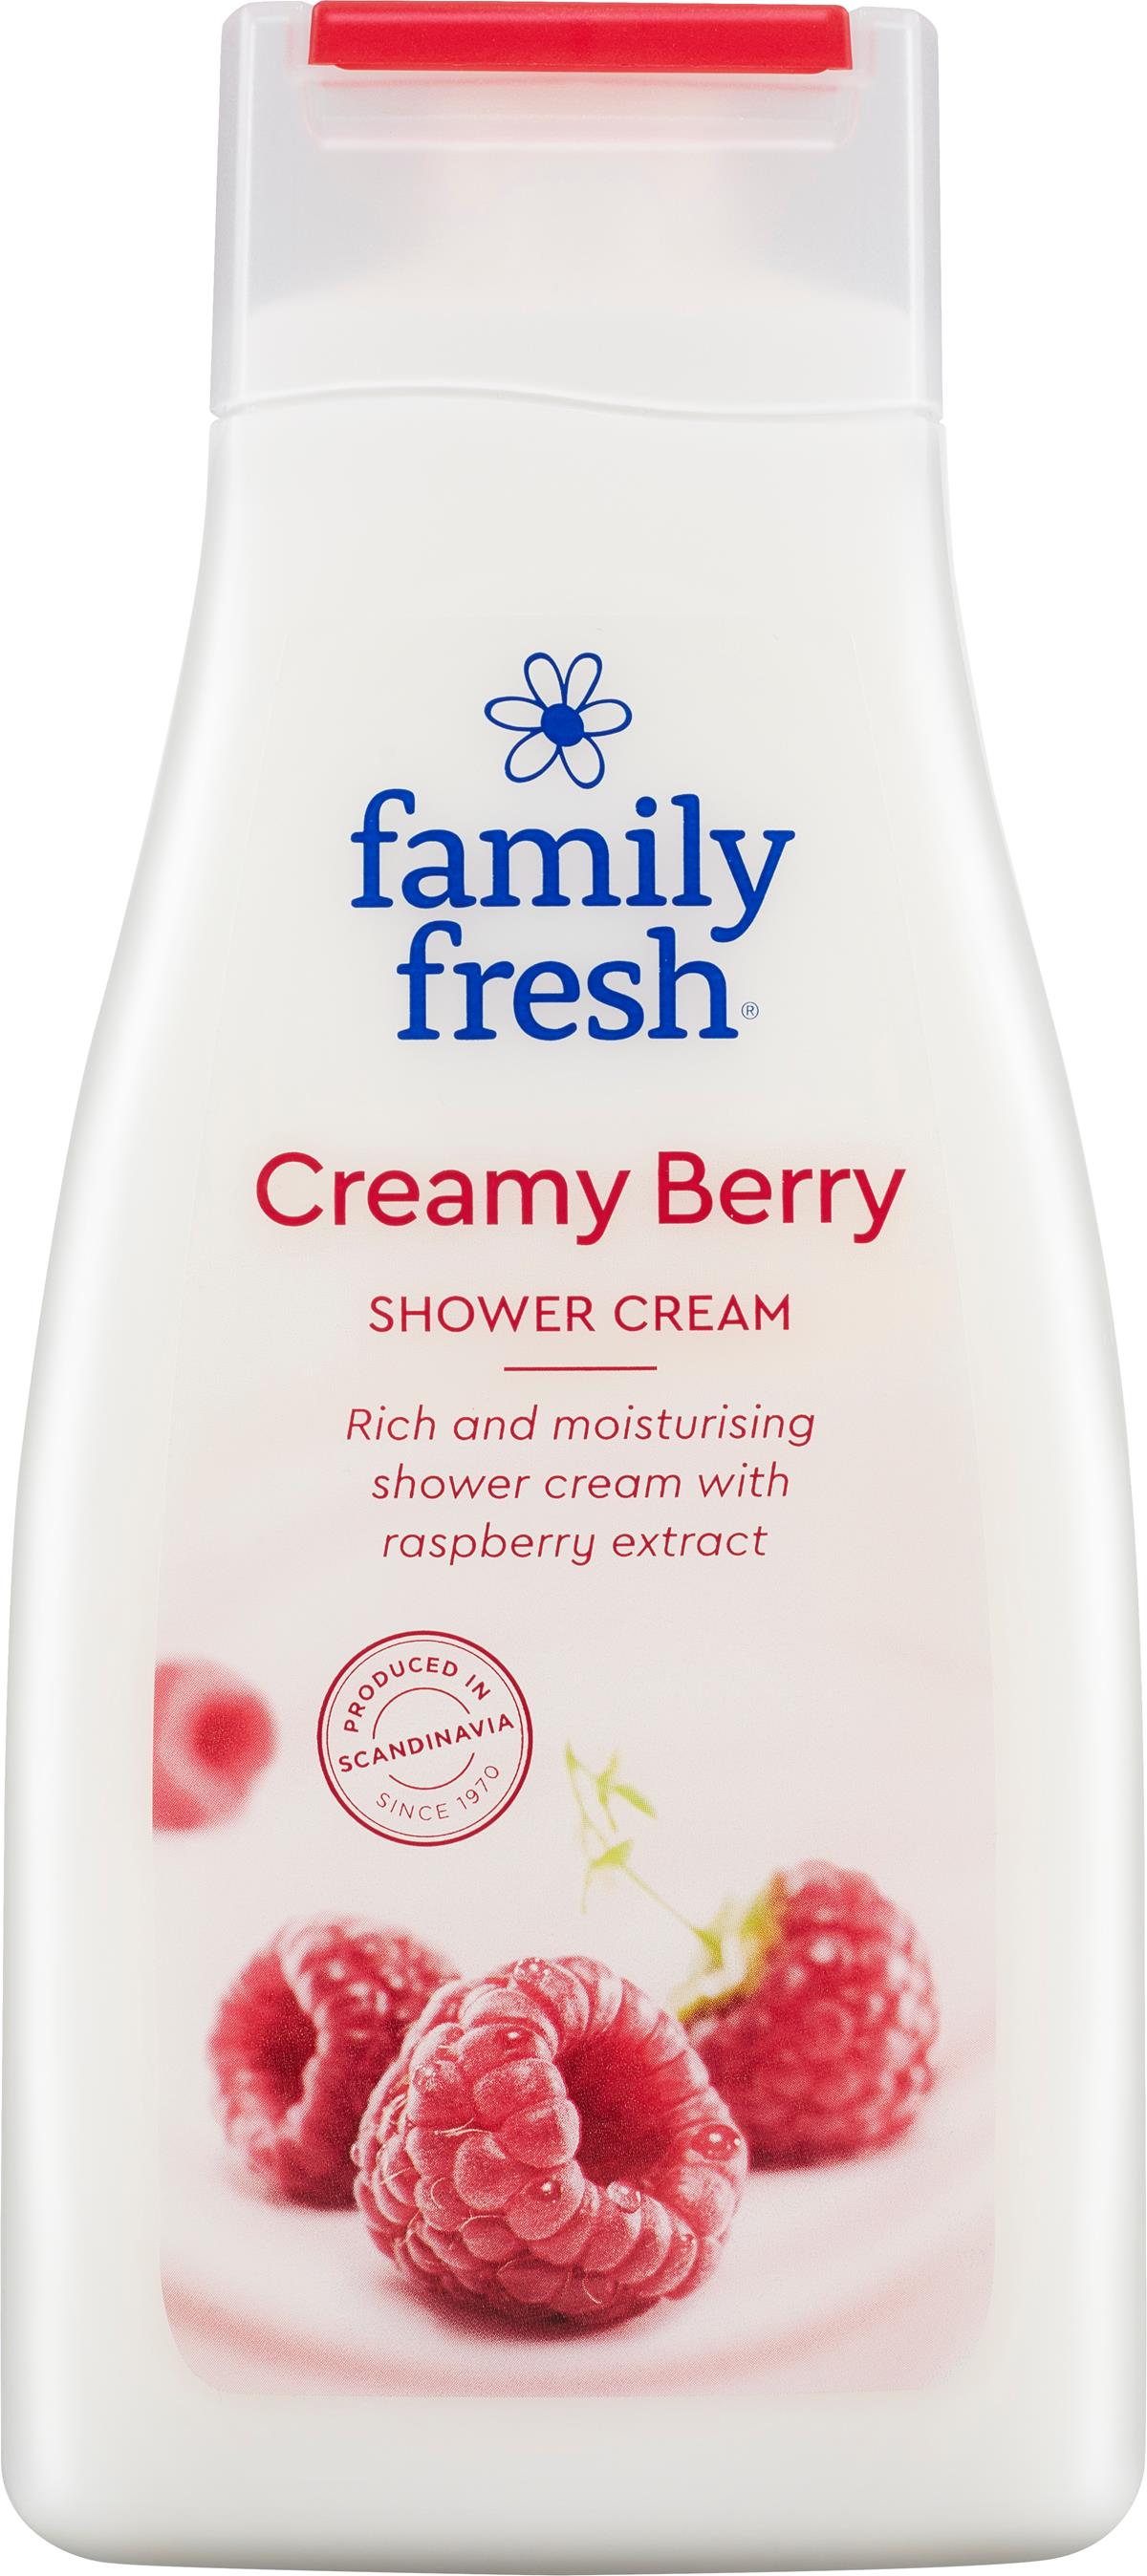 Fresh shower creaming pictures